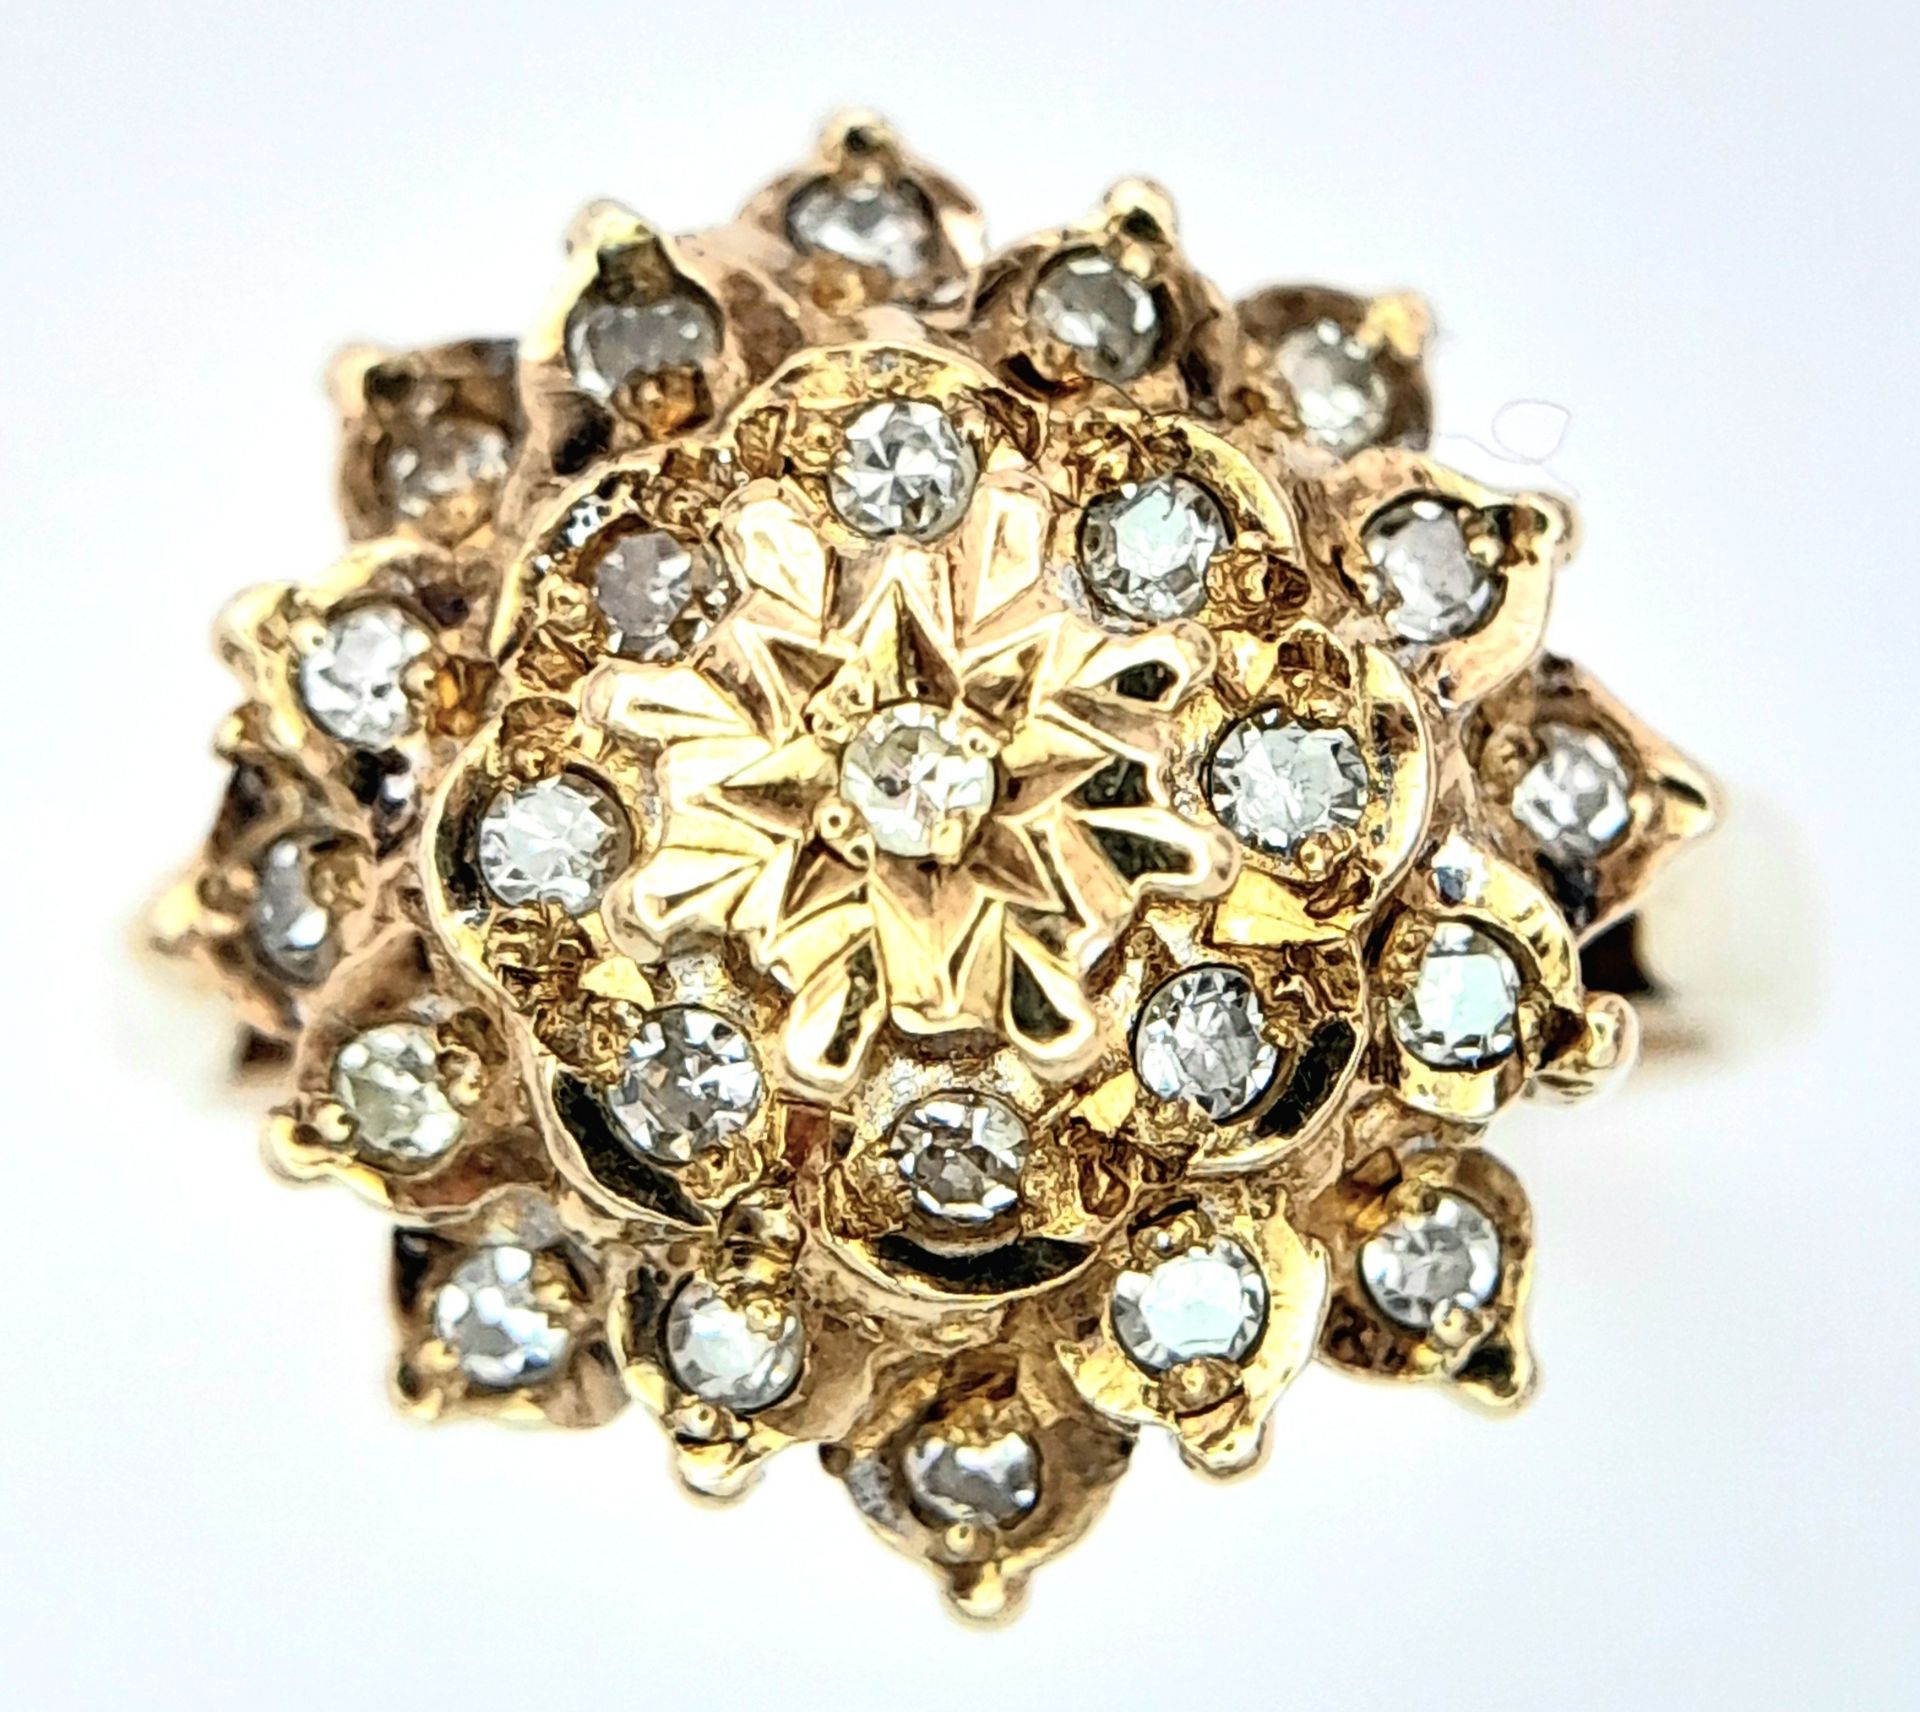 A 9K YELLOW GOLD DIAMOND CLUSTER RING. Size J, 2.8g total weight. Ref: SC 8032 - Image 3 of 6